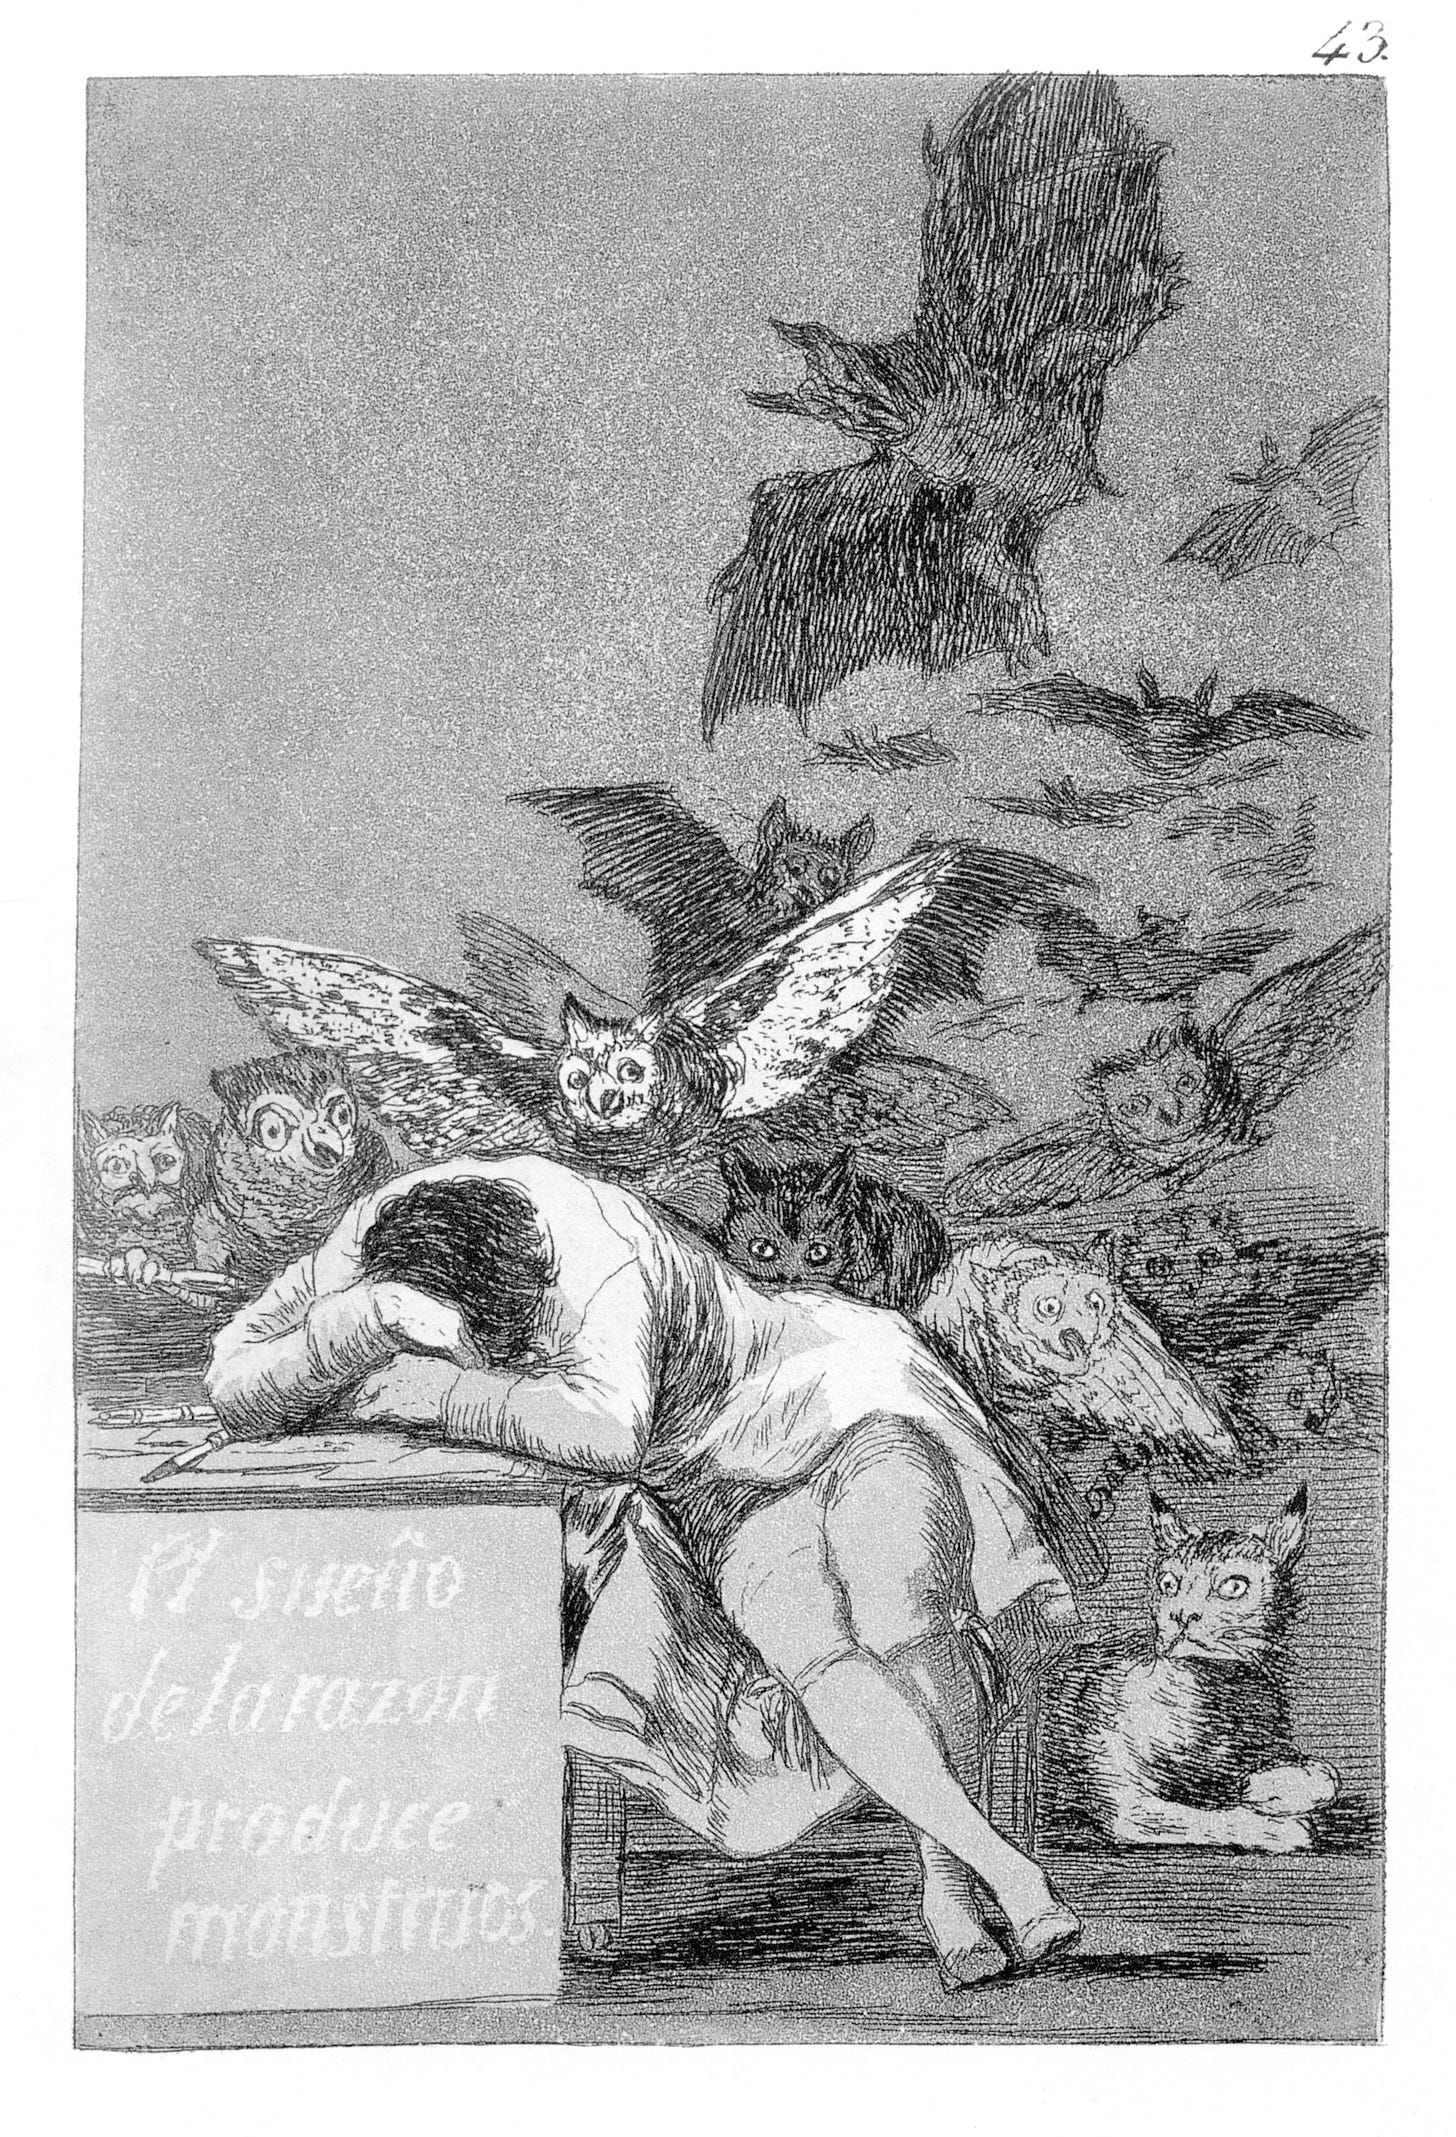 https://ukdhm.org/v2/wp-content/uploads/2017/08/the_sleep_of_reason_produces_monsters-Goya-1797-to-1799.jpg